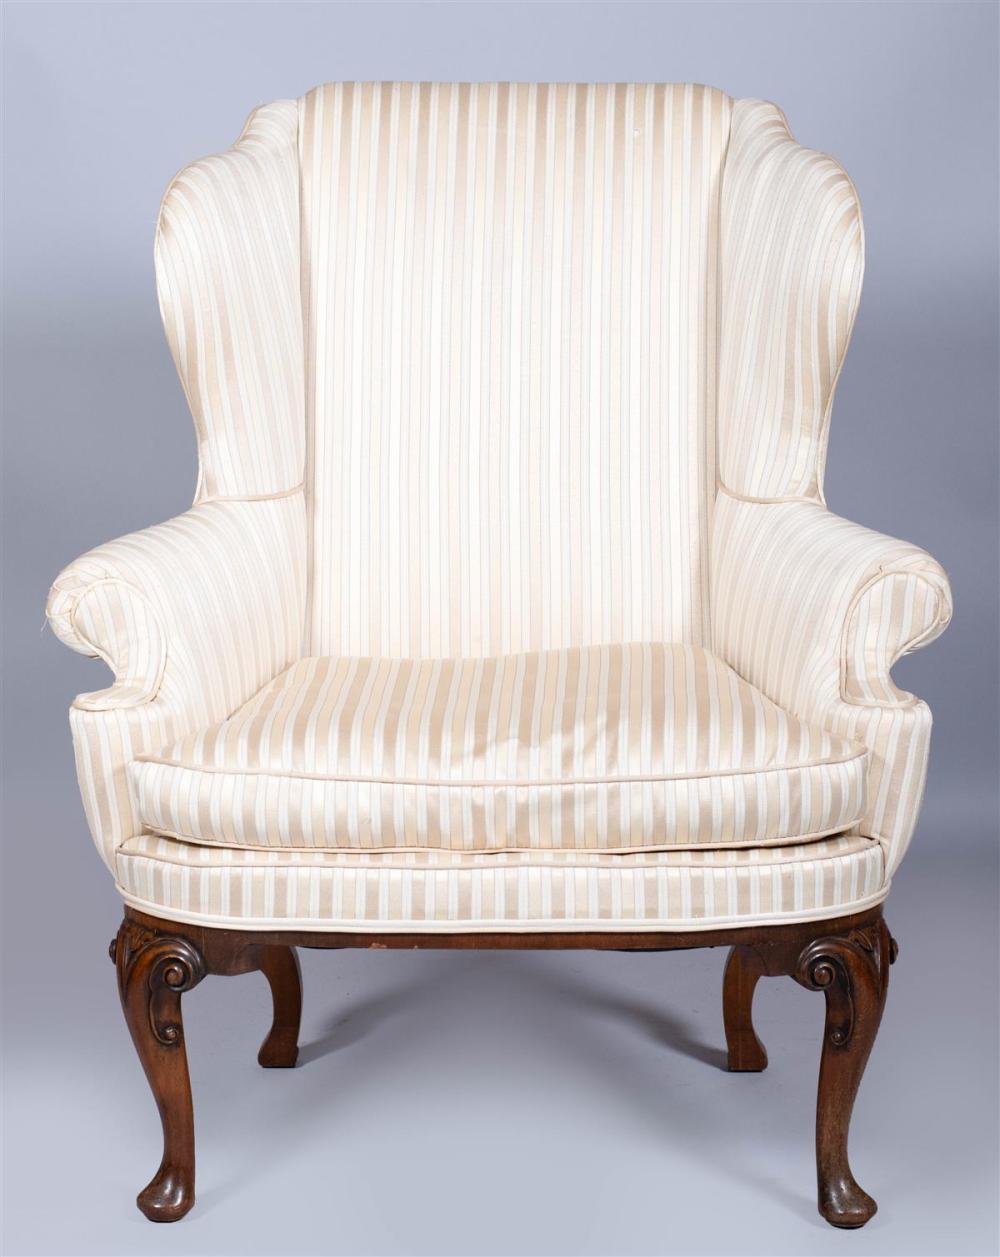 QUEEN ANNE STYLE MAHOGANY WING